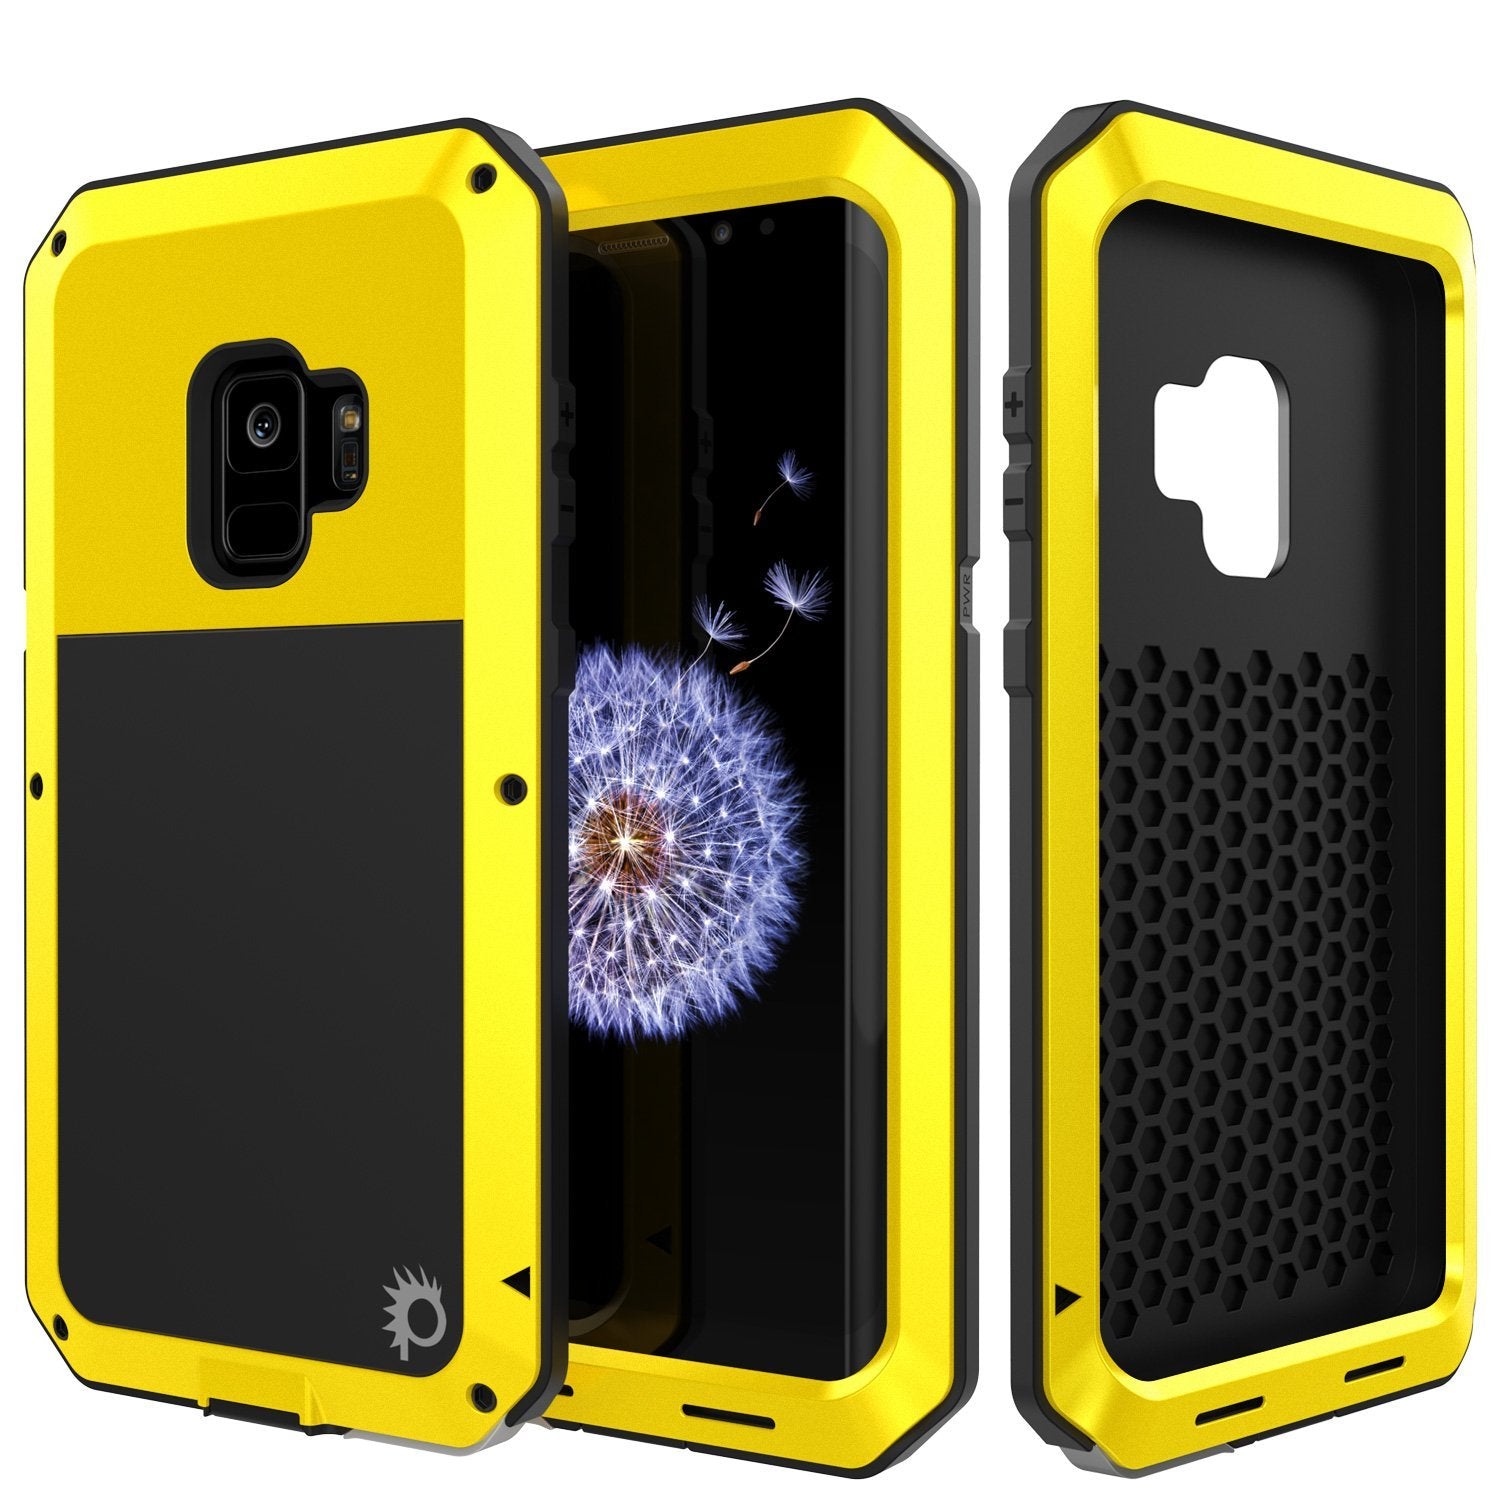 Galaxy S10 Metal Case, Heavy Duty Military Grade Rugged Armor Cover [Neon]